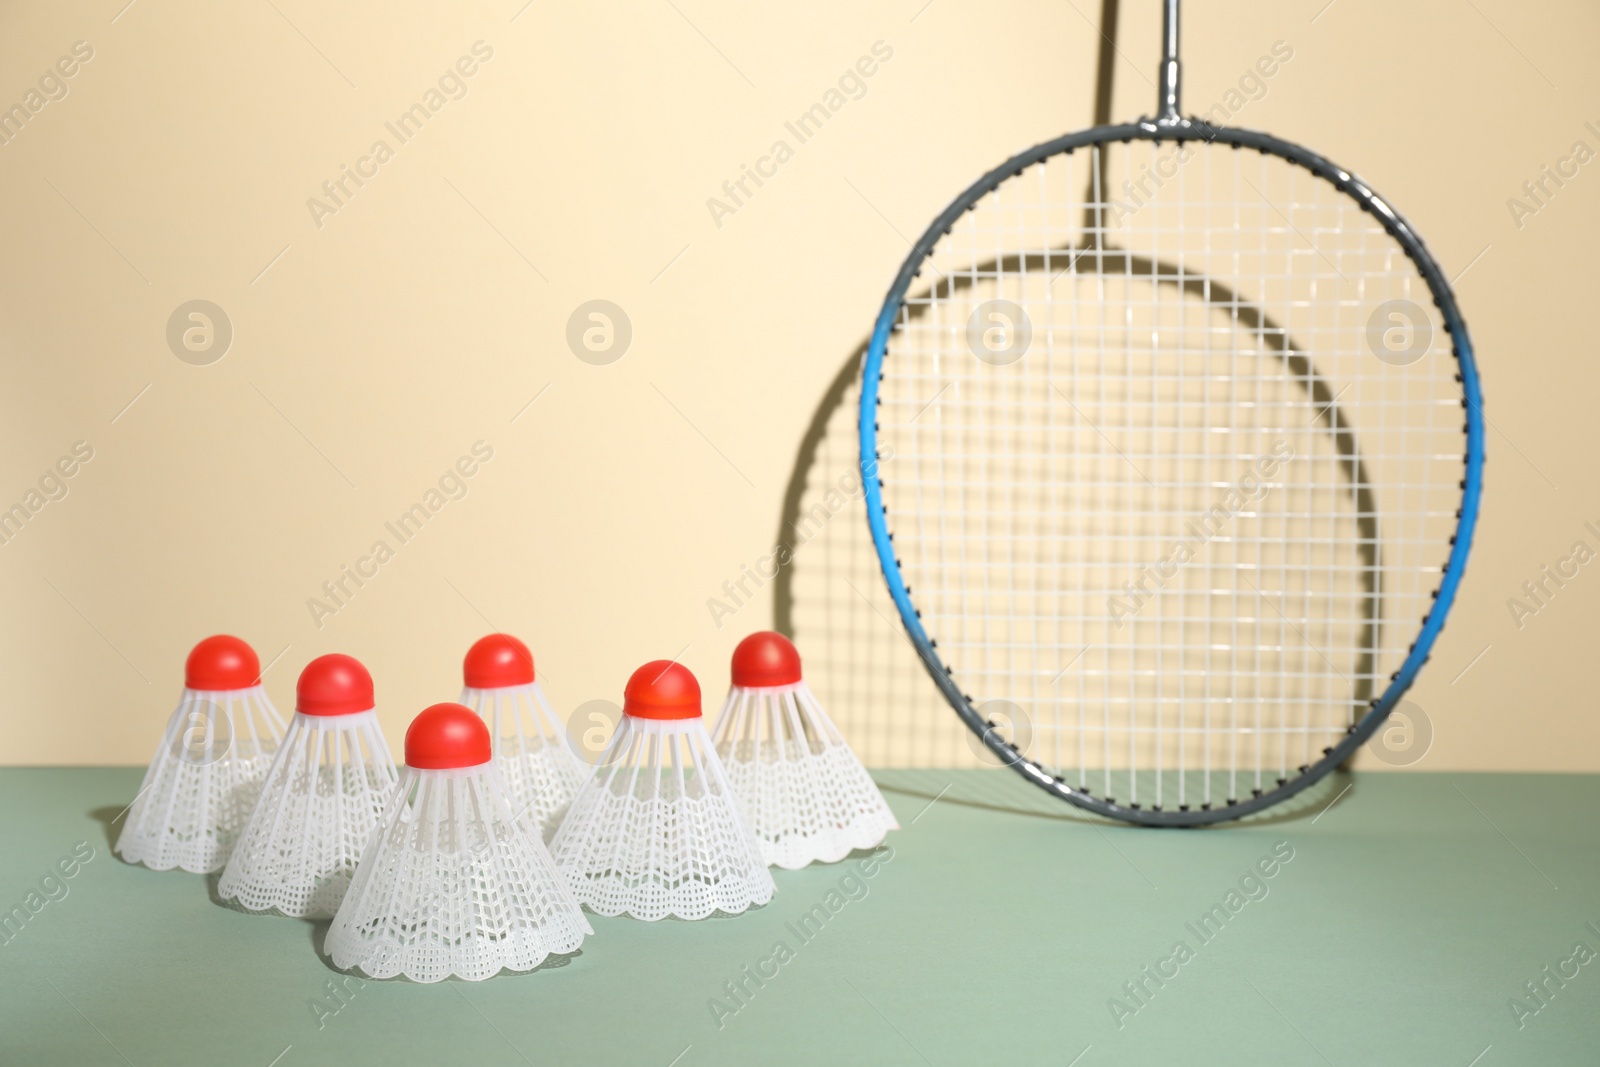 Photo of Shuttlecocks and racquet against beige background. Badminton equipment